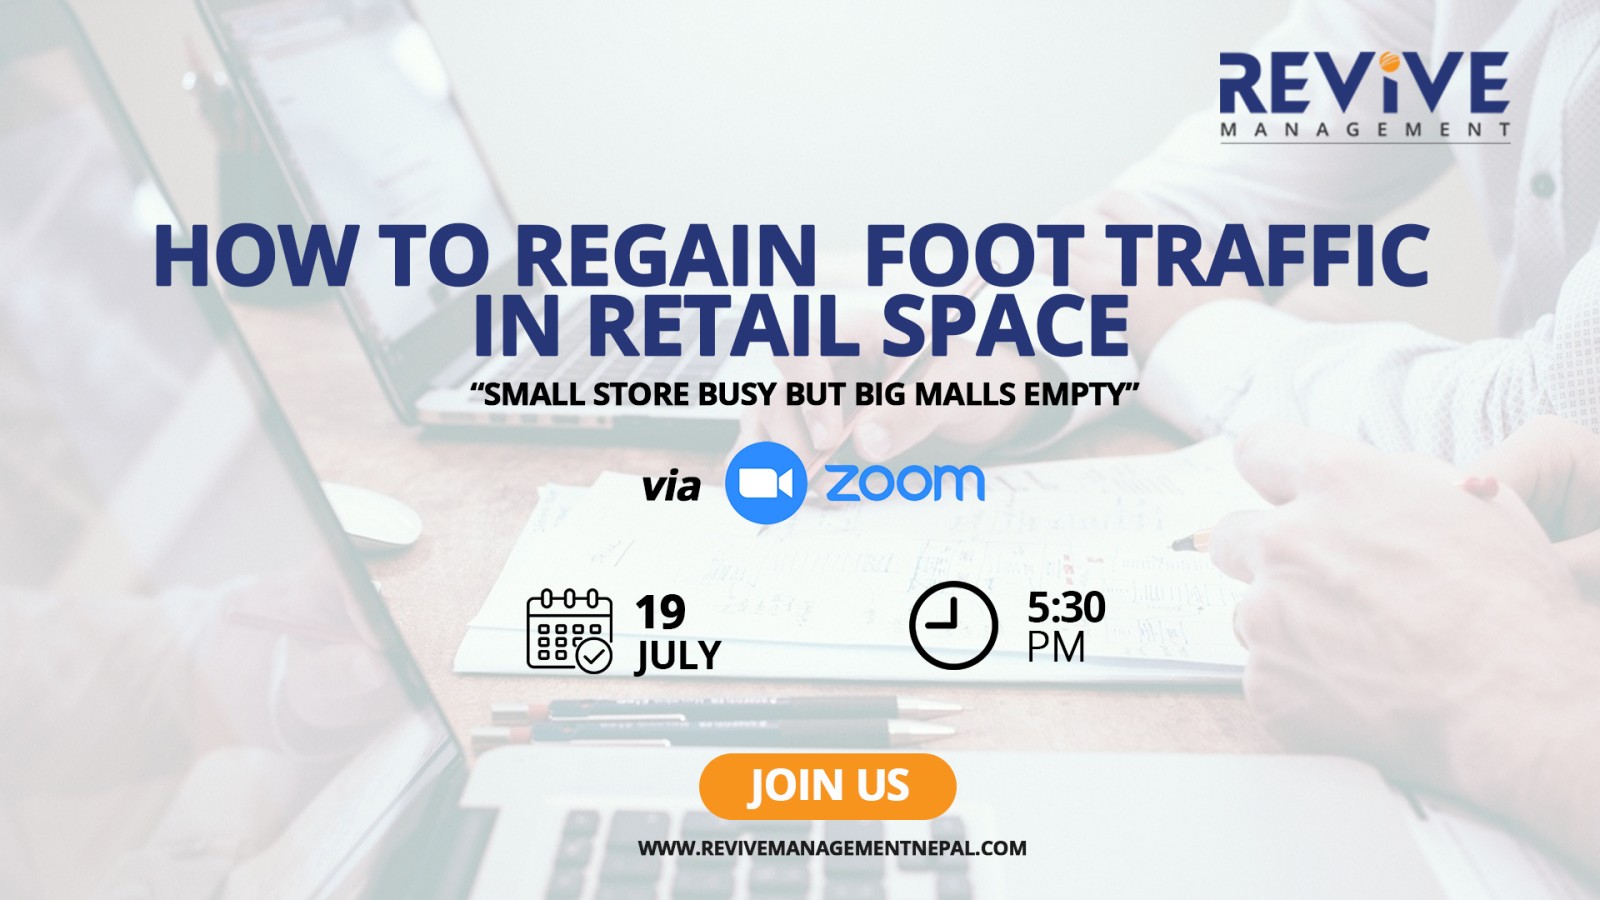 How to Regain Foot Traffic in Retail Space